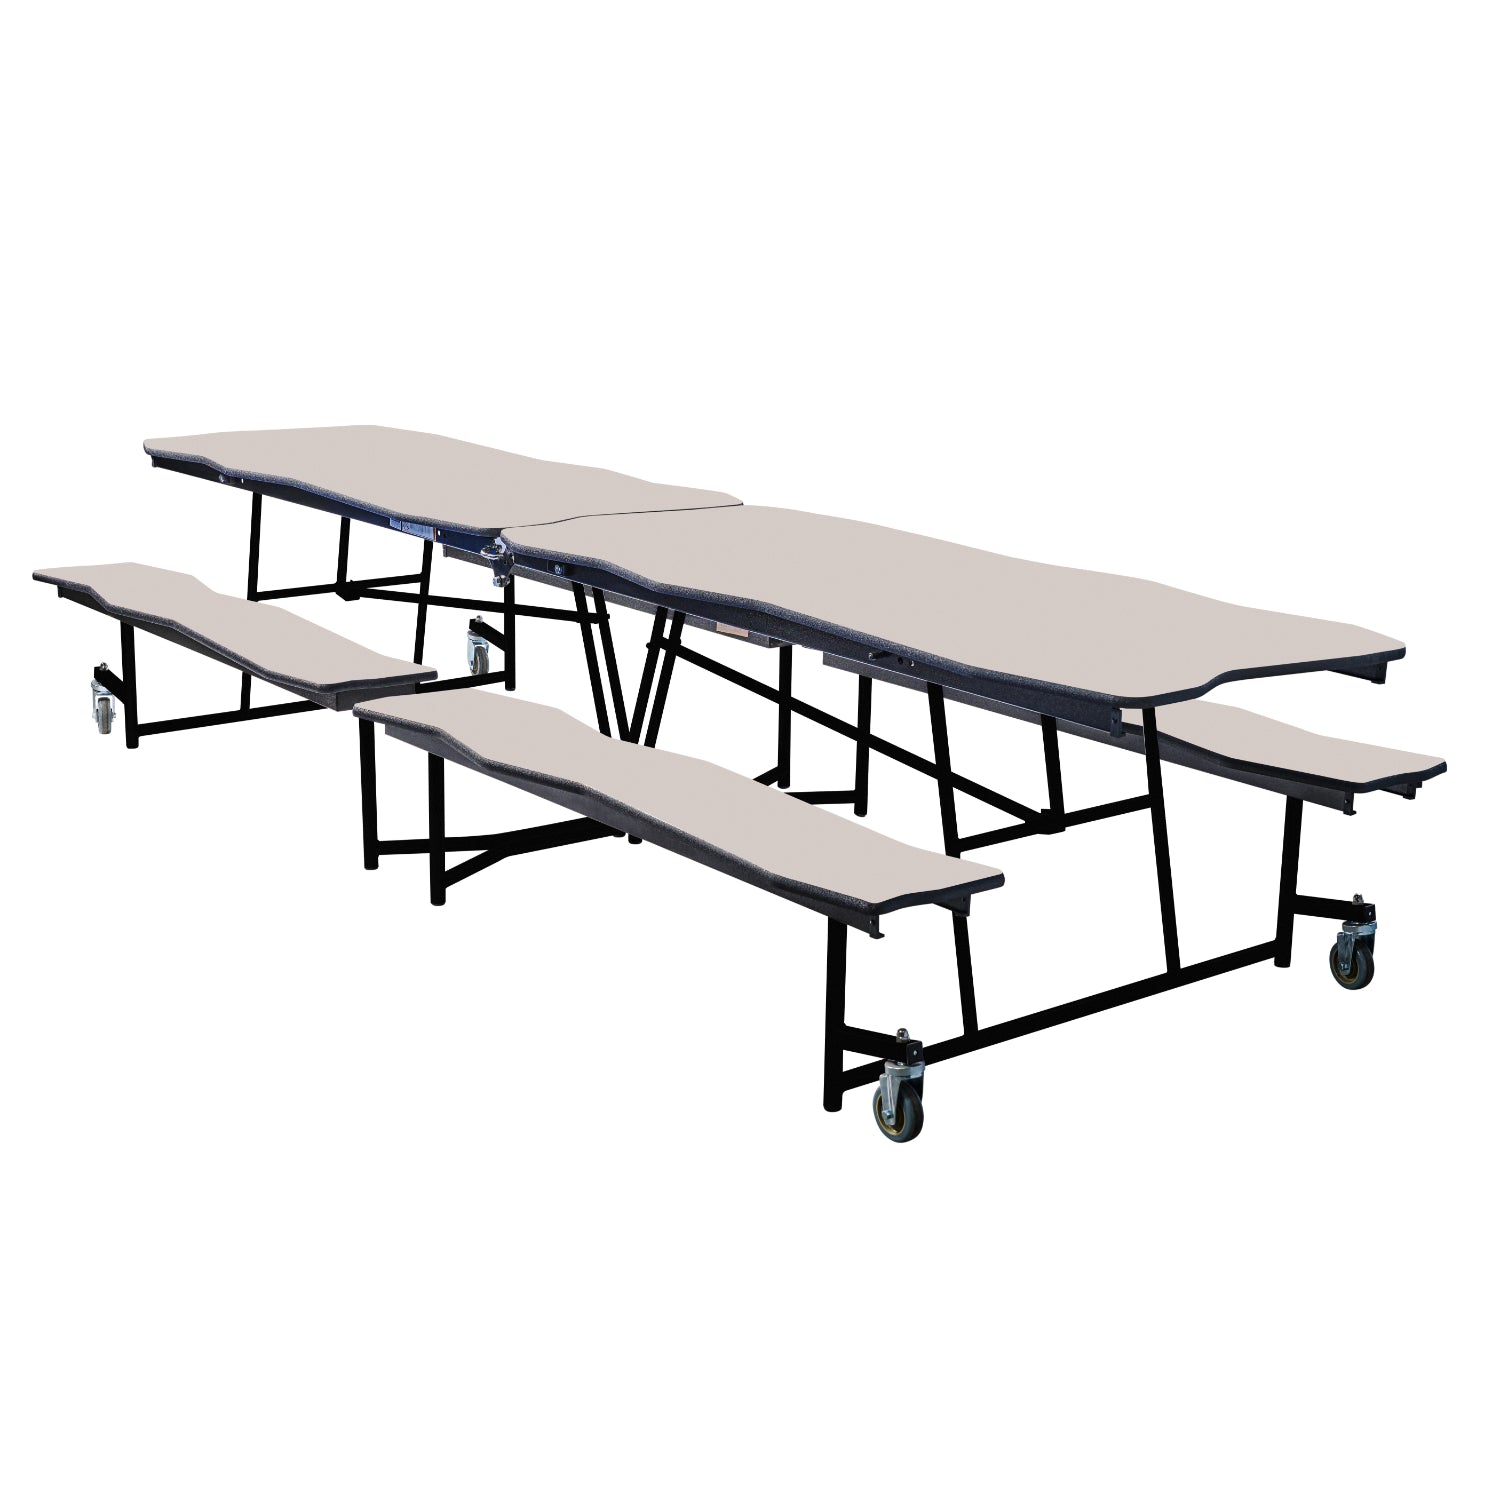 Mobile Cafeteria Table with Benches, 12' Bedrock, Particleboard Core, Vinyl T-Mold Edge, Textured Black Frame